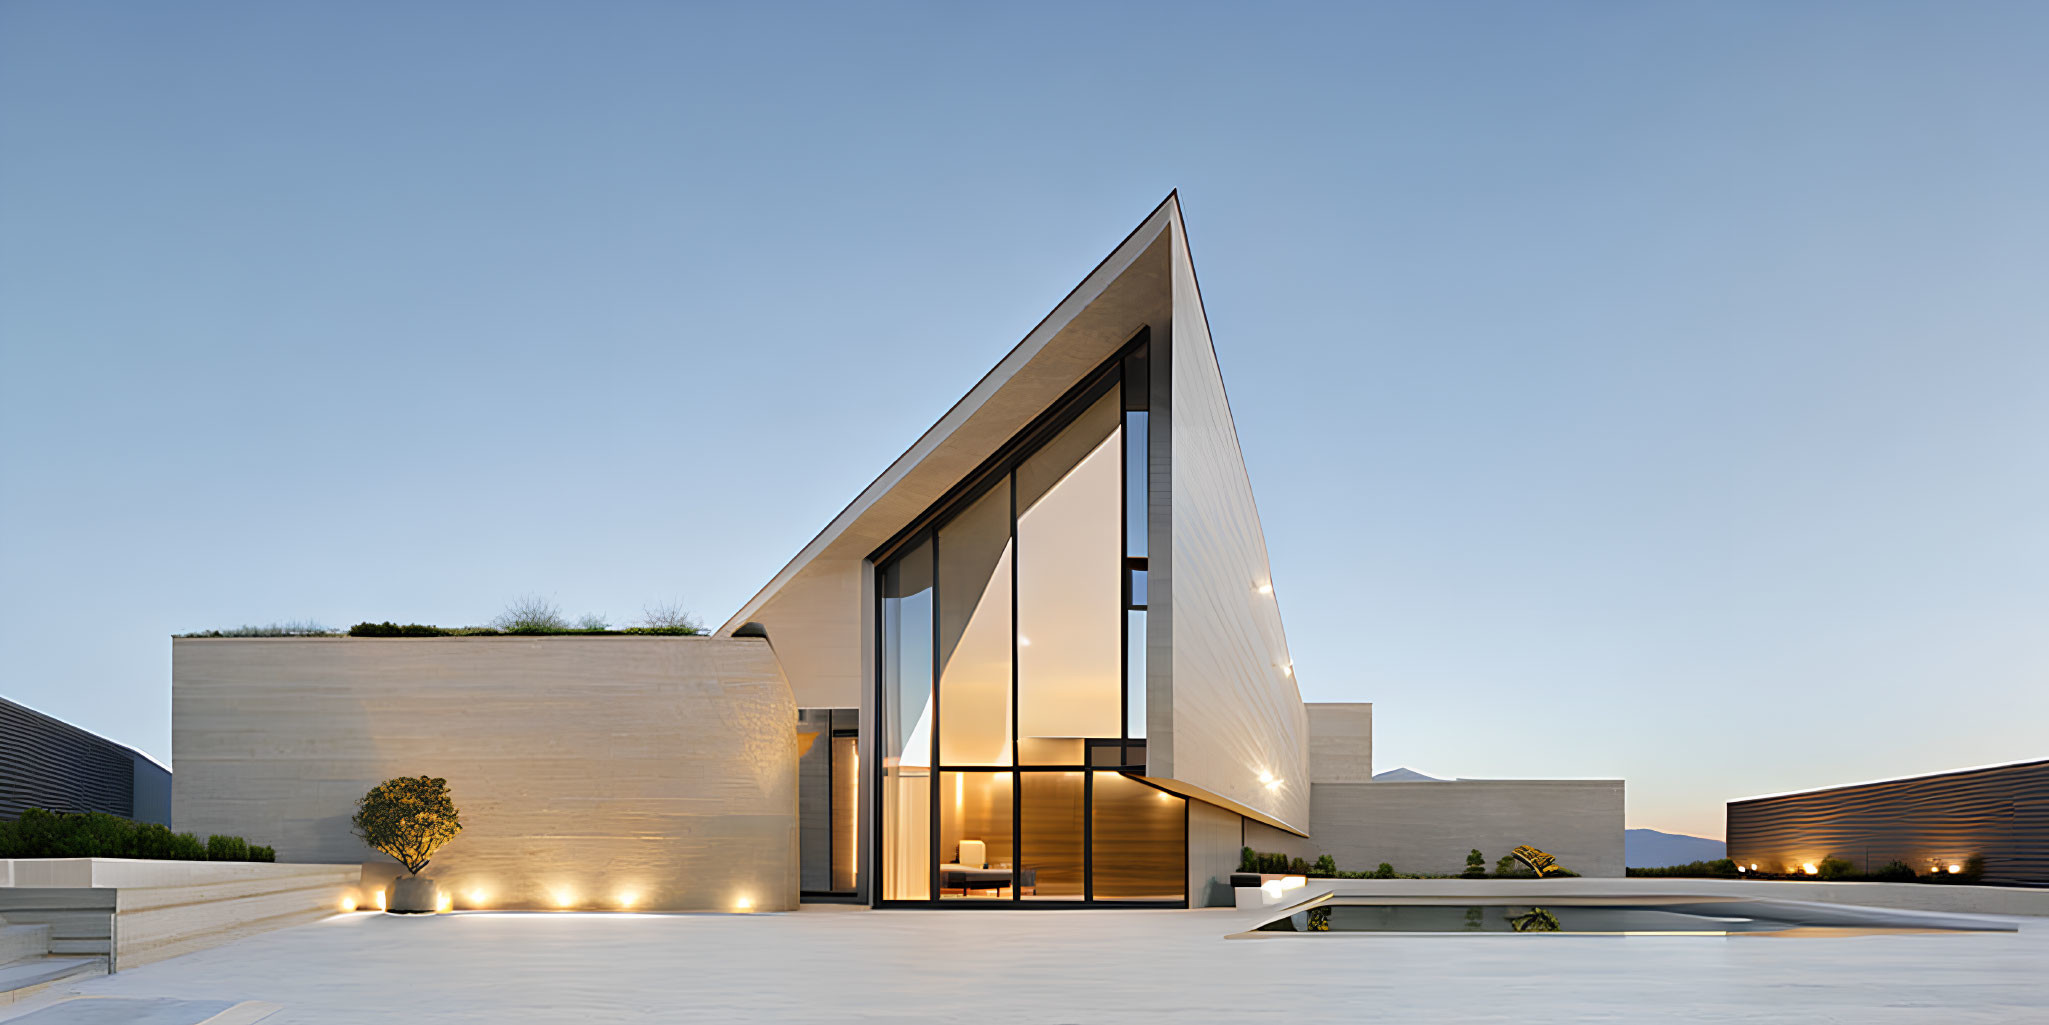 Modern Architectural Home with Triangular Roof and Glass Windows Illuminated at Twilight